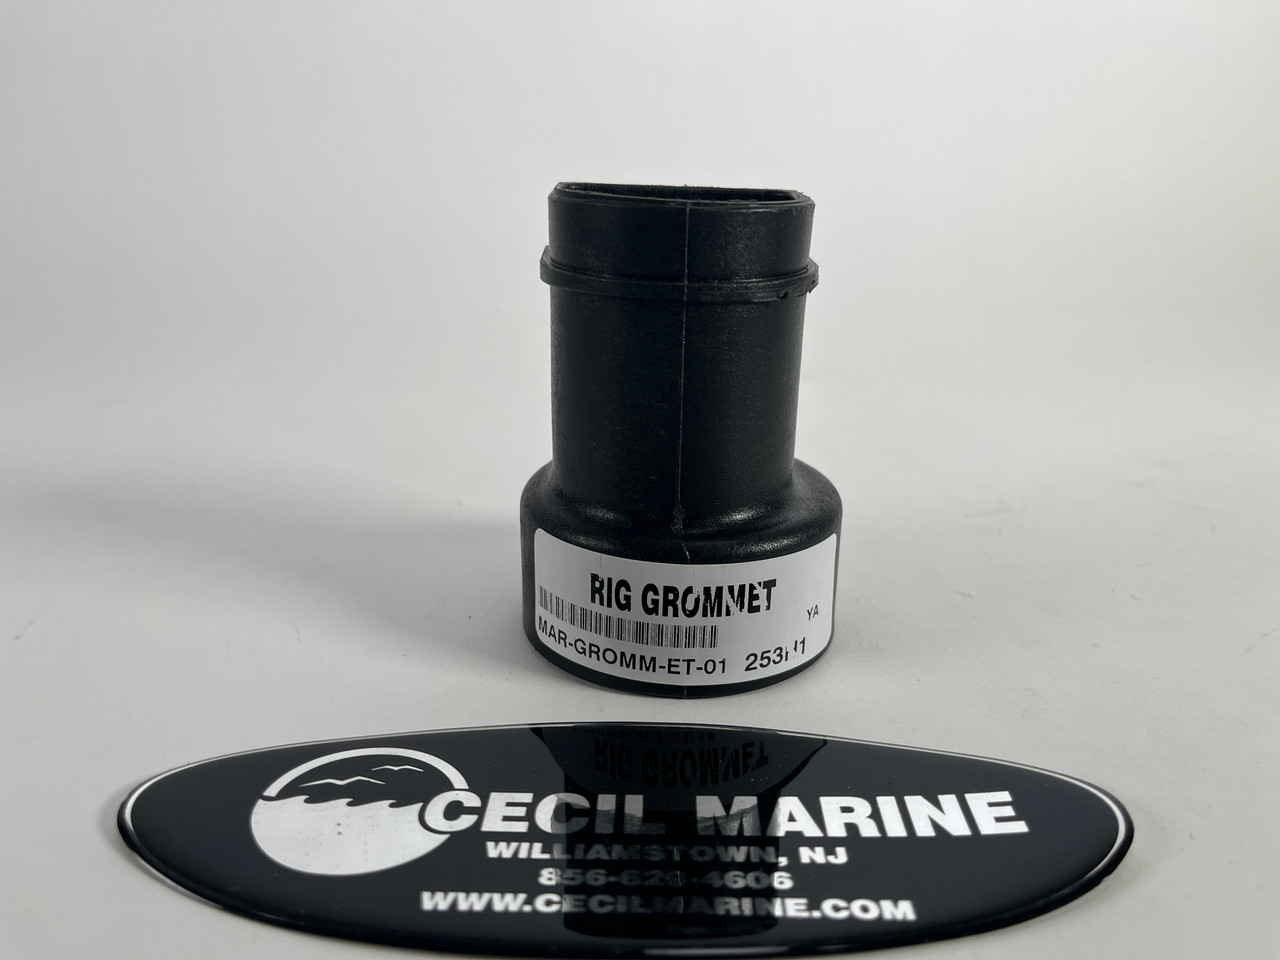 $24.99* GENUINE YAMAHA no tax* RIG GROMMET MAR-GROMM-ET-01 *In Stock & Ready To Ship